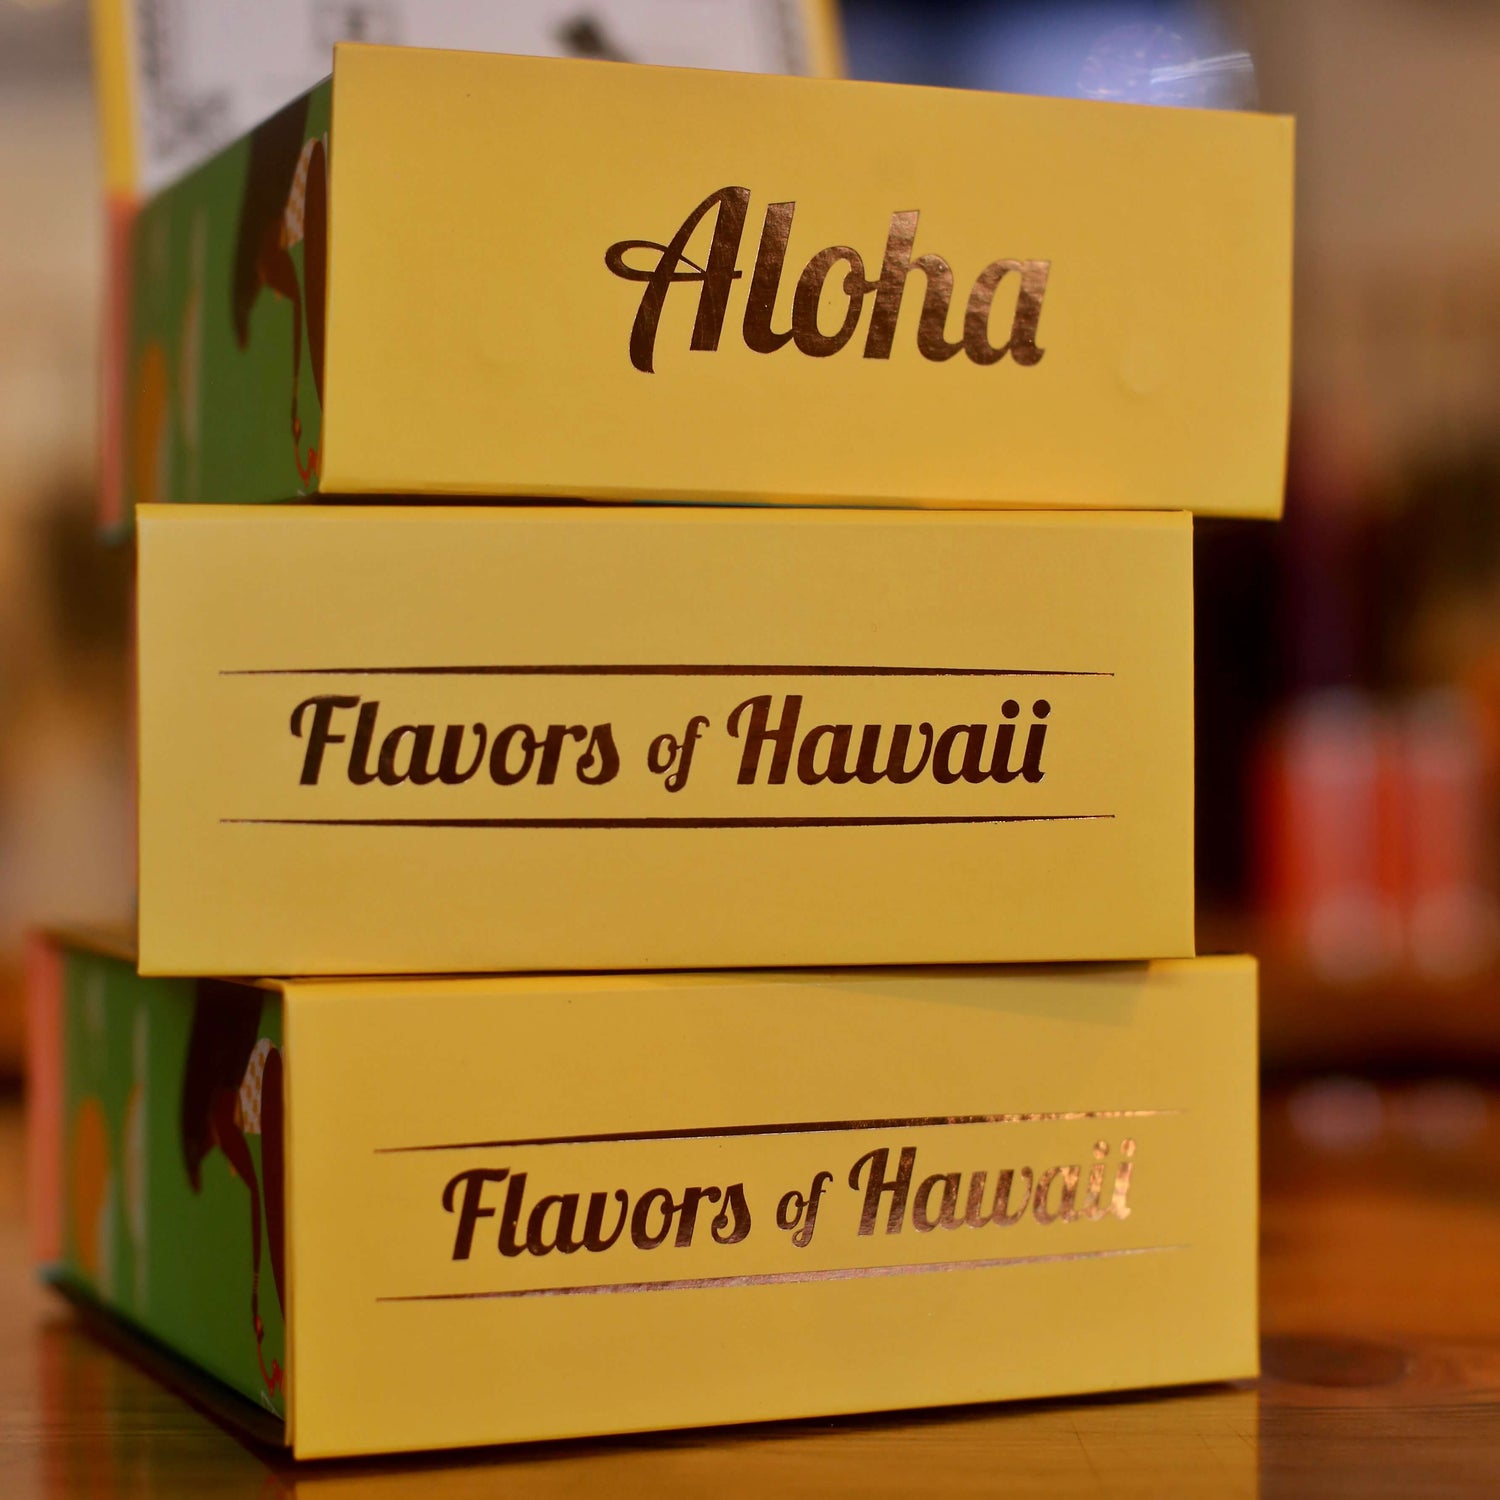 Image of the side of the gift box, reading "Aloha" and "Flavors of Hawaii"